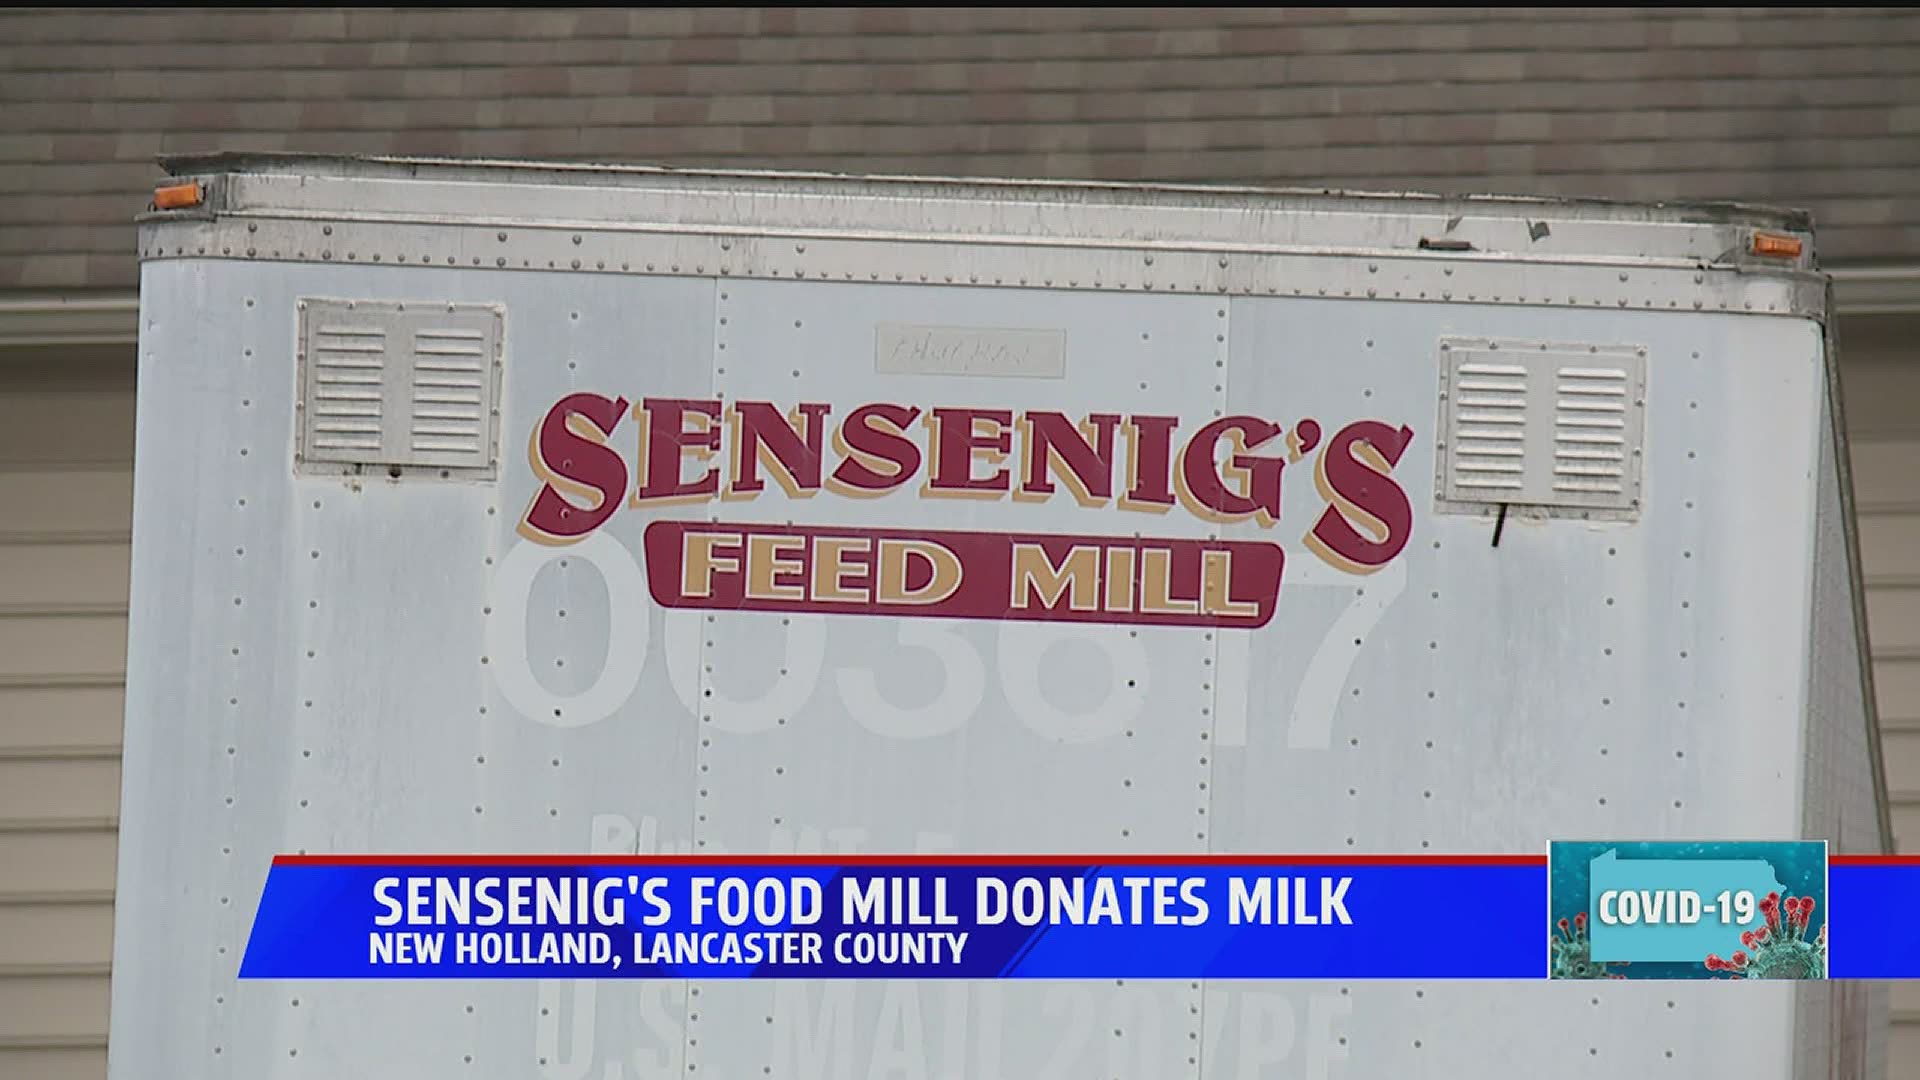 Sensenig's Feed Mill in New Holland purchases over 5,000 gallons of milk from a local dairy farm, to then give it back to struggling families in the community.